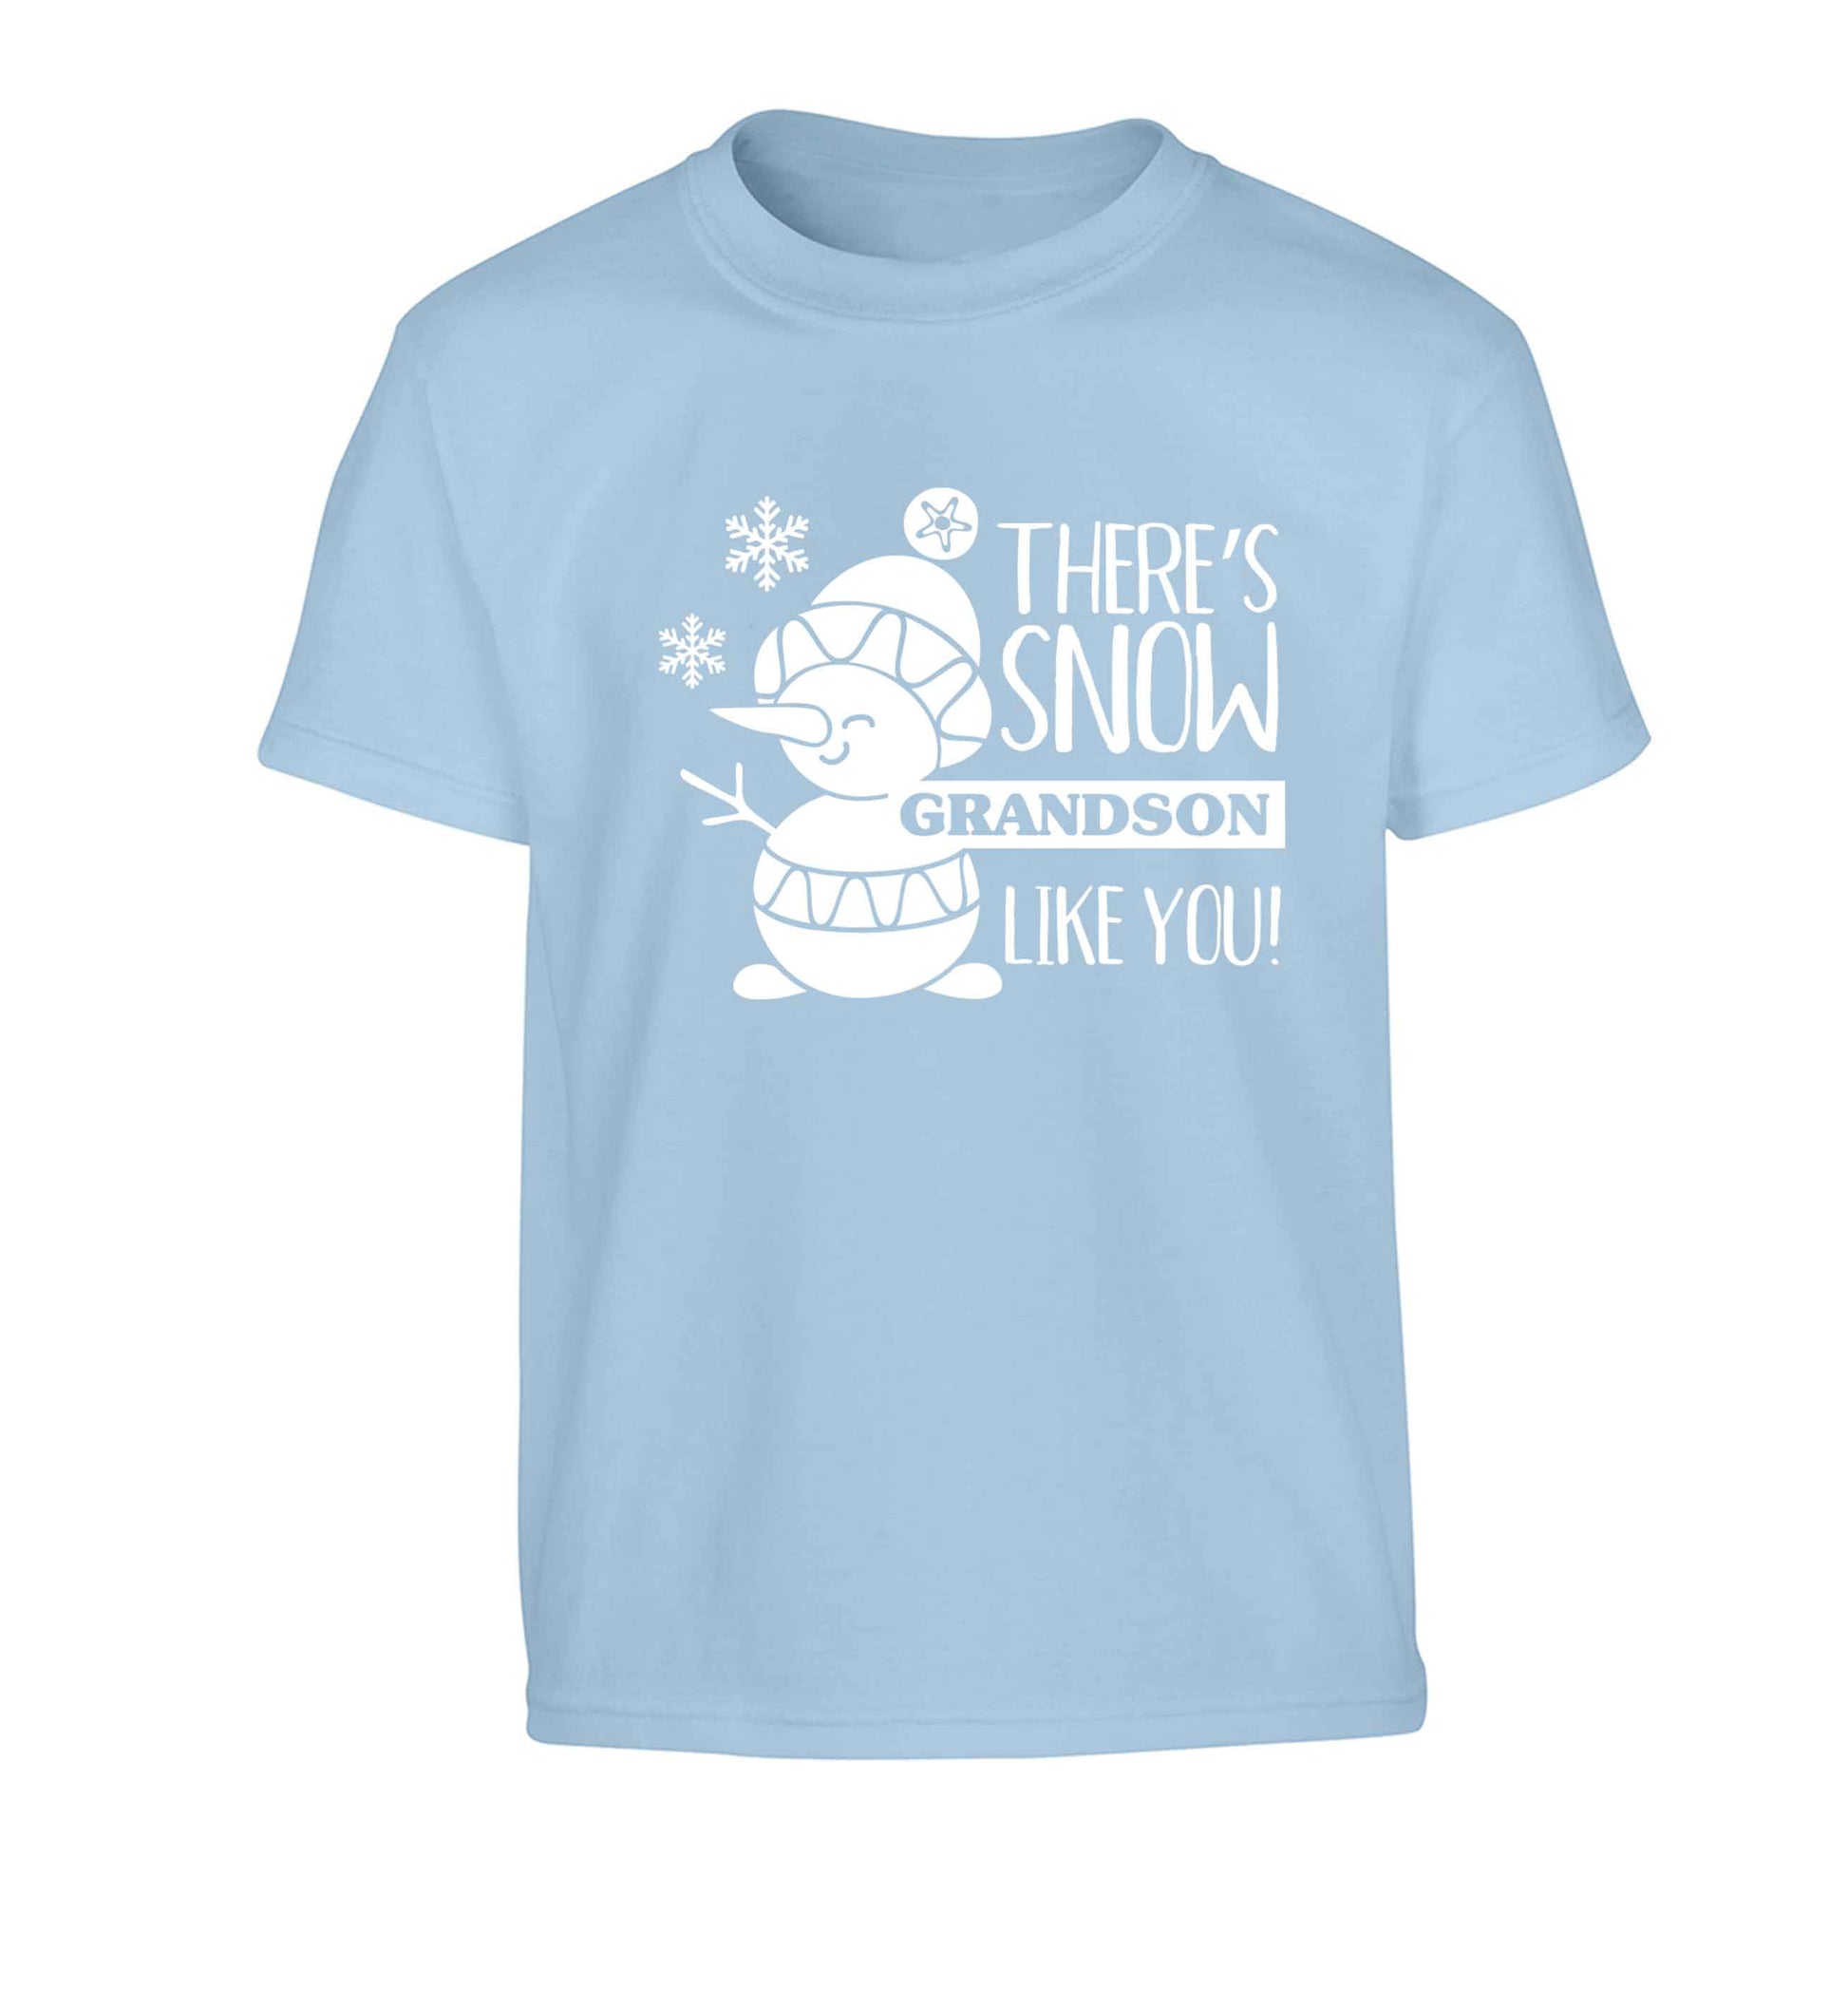 There's snow grandson like you Children's light blue Tshirt 12-13 Years